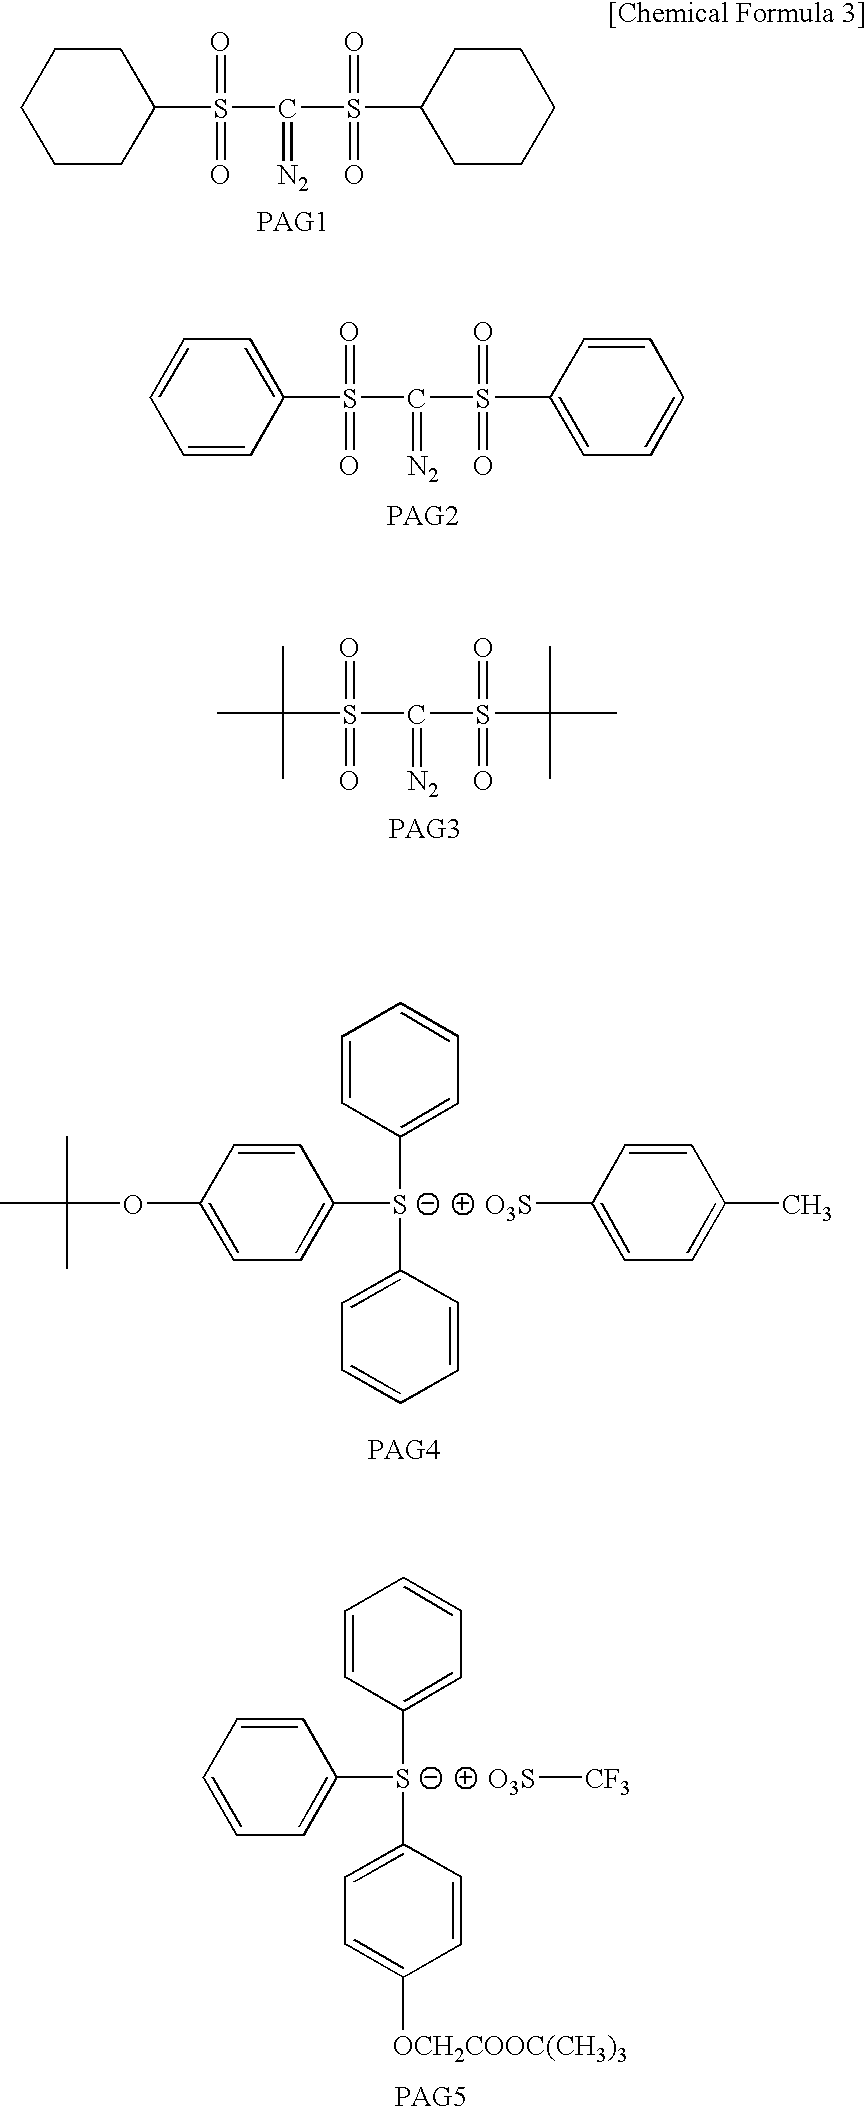 Chemical amplification type photoresist composition, method for producing a semiconductor device using the composition, and semiconductor substrate